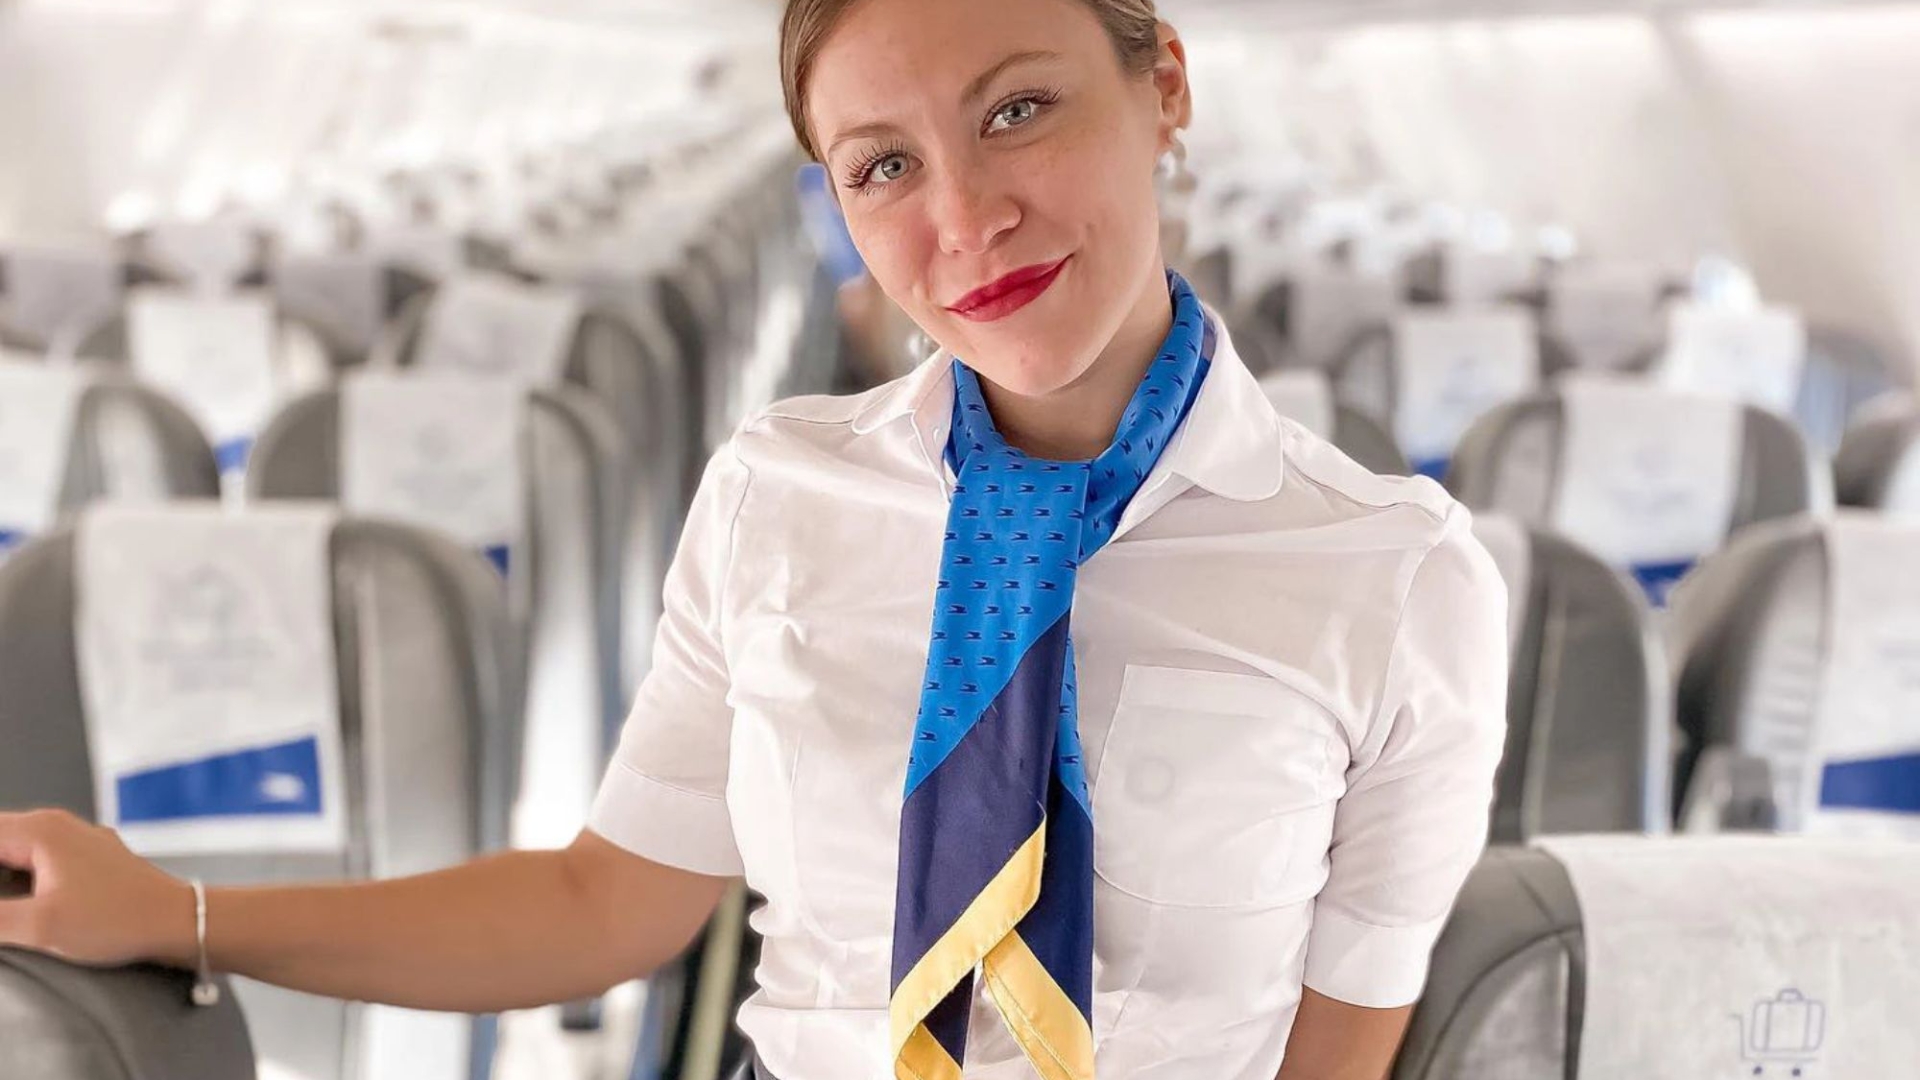 I am a flight attendant. There are many secrets to the job, including 3 things that are prohibited from being done on the plane.